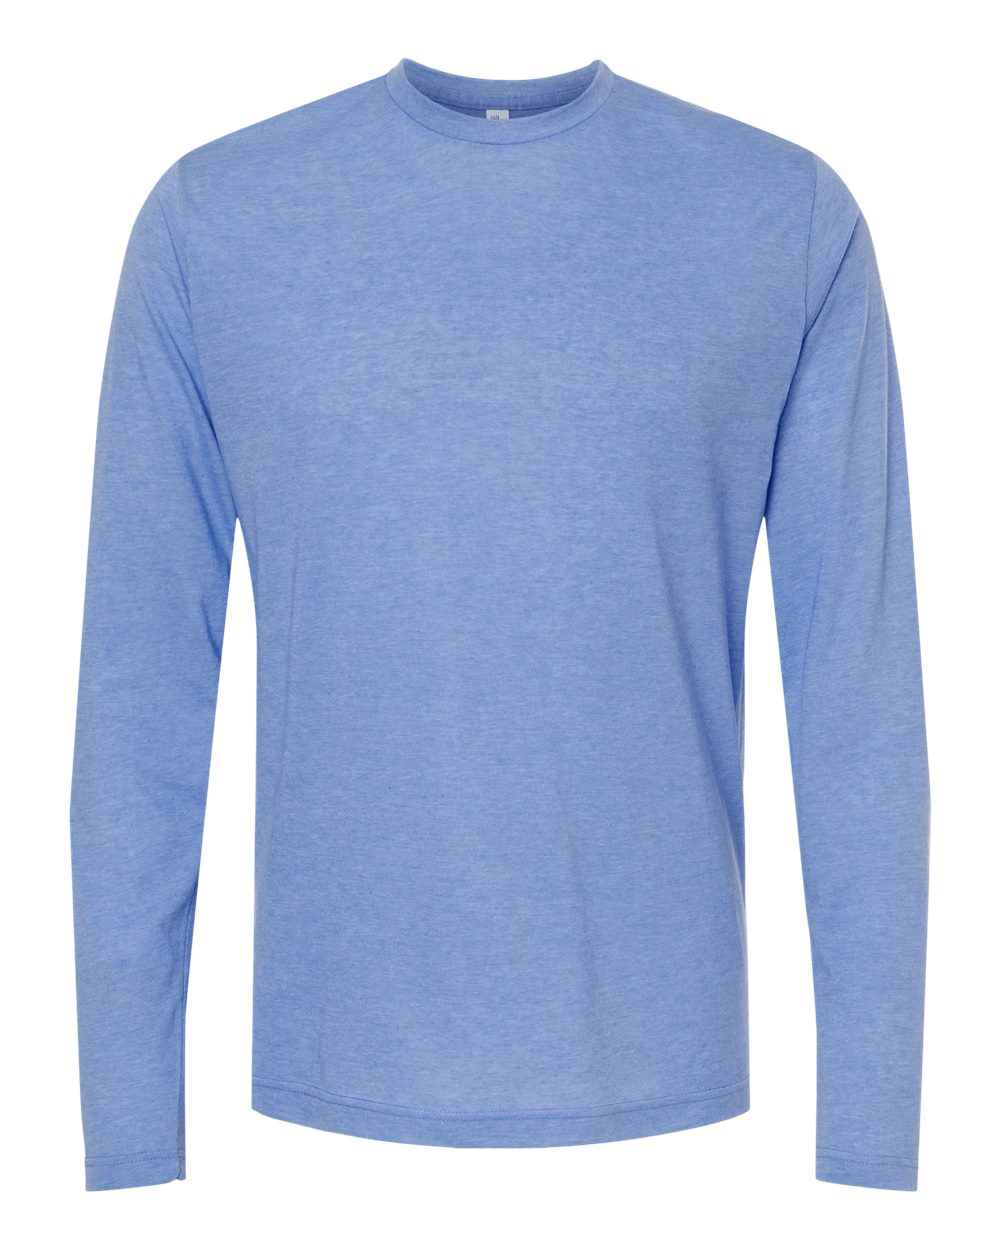 M&O Poly-Blend Long Sleeve T-Shirt 3520 #color_Heather Blue